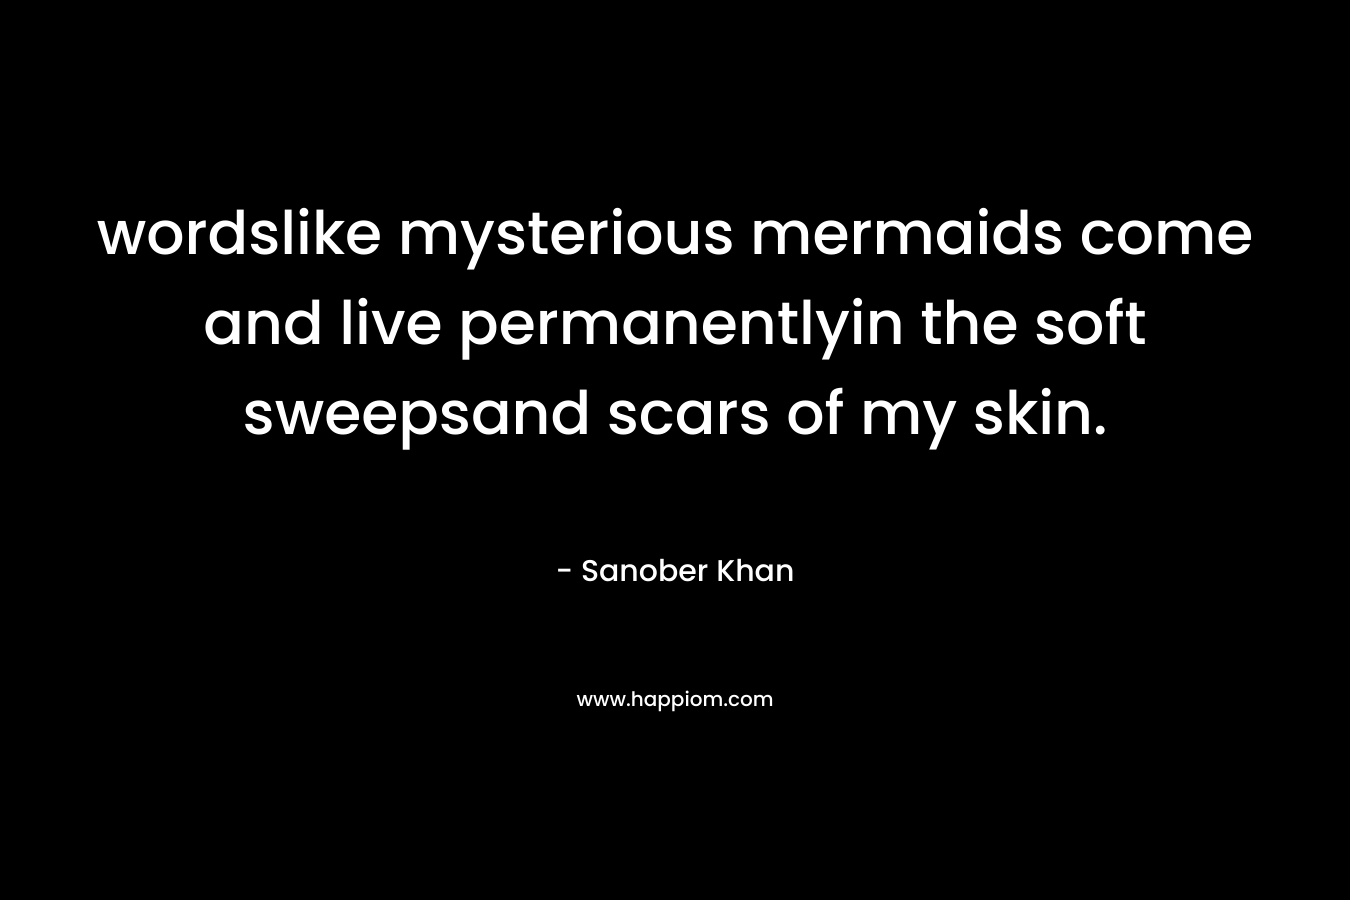 wordslike mysterious mermaids come and live permanentlyin the soft sweepsand scars of my skin.